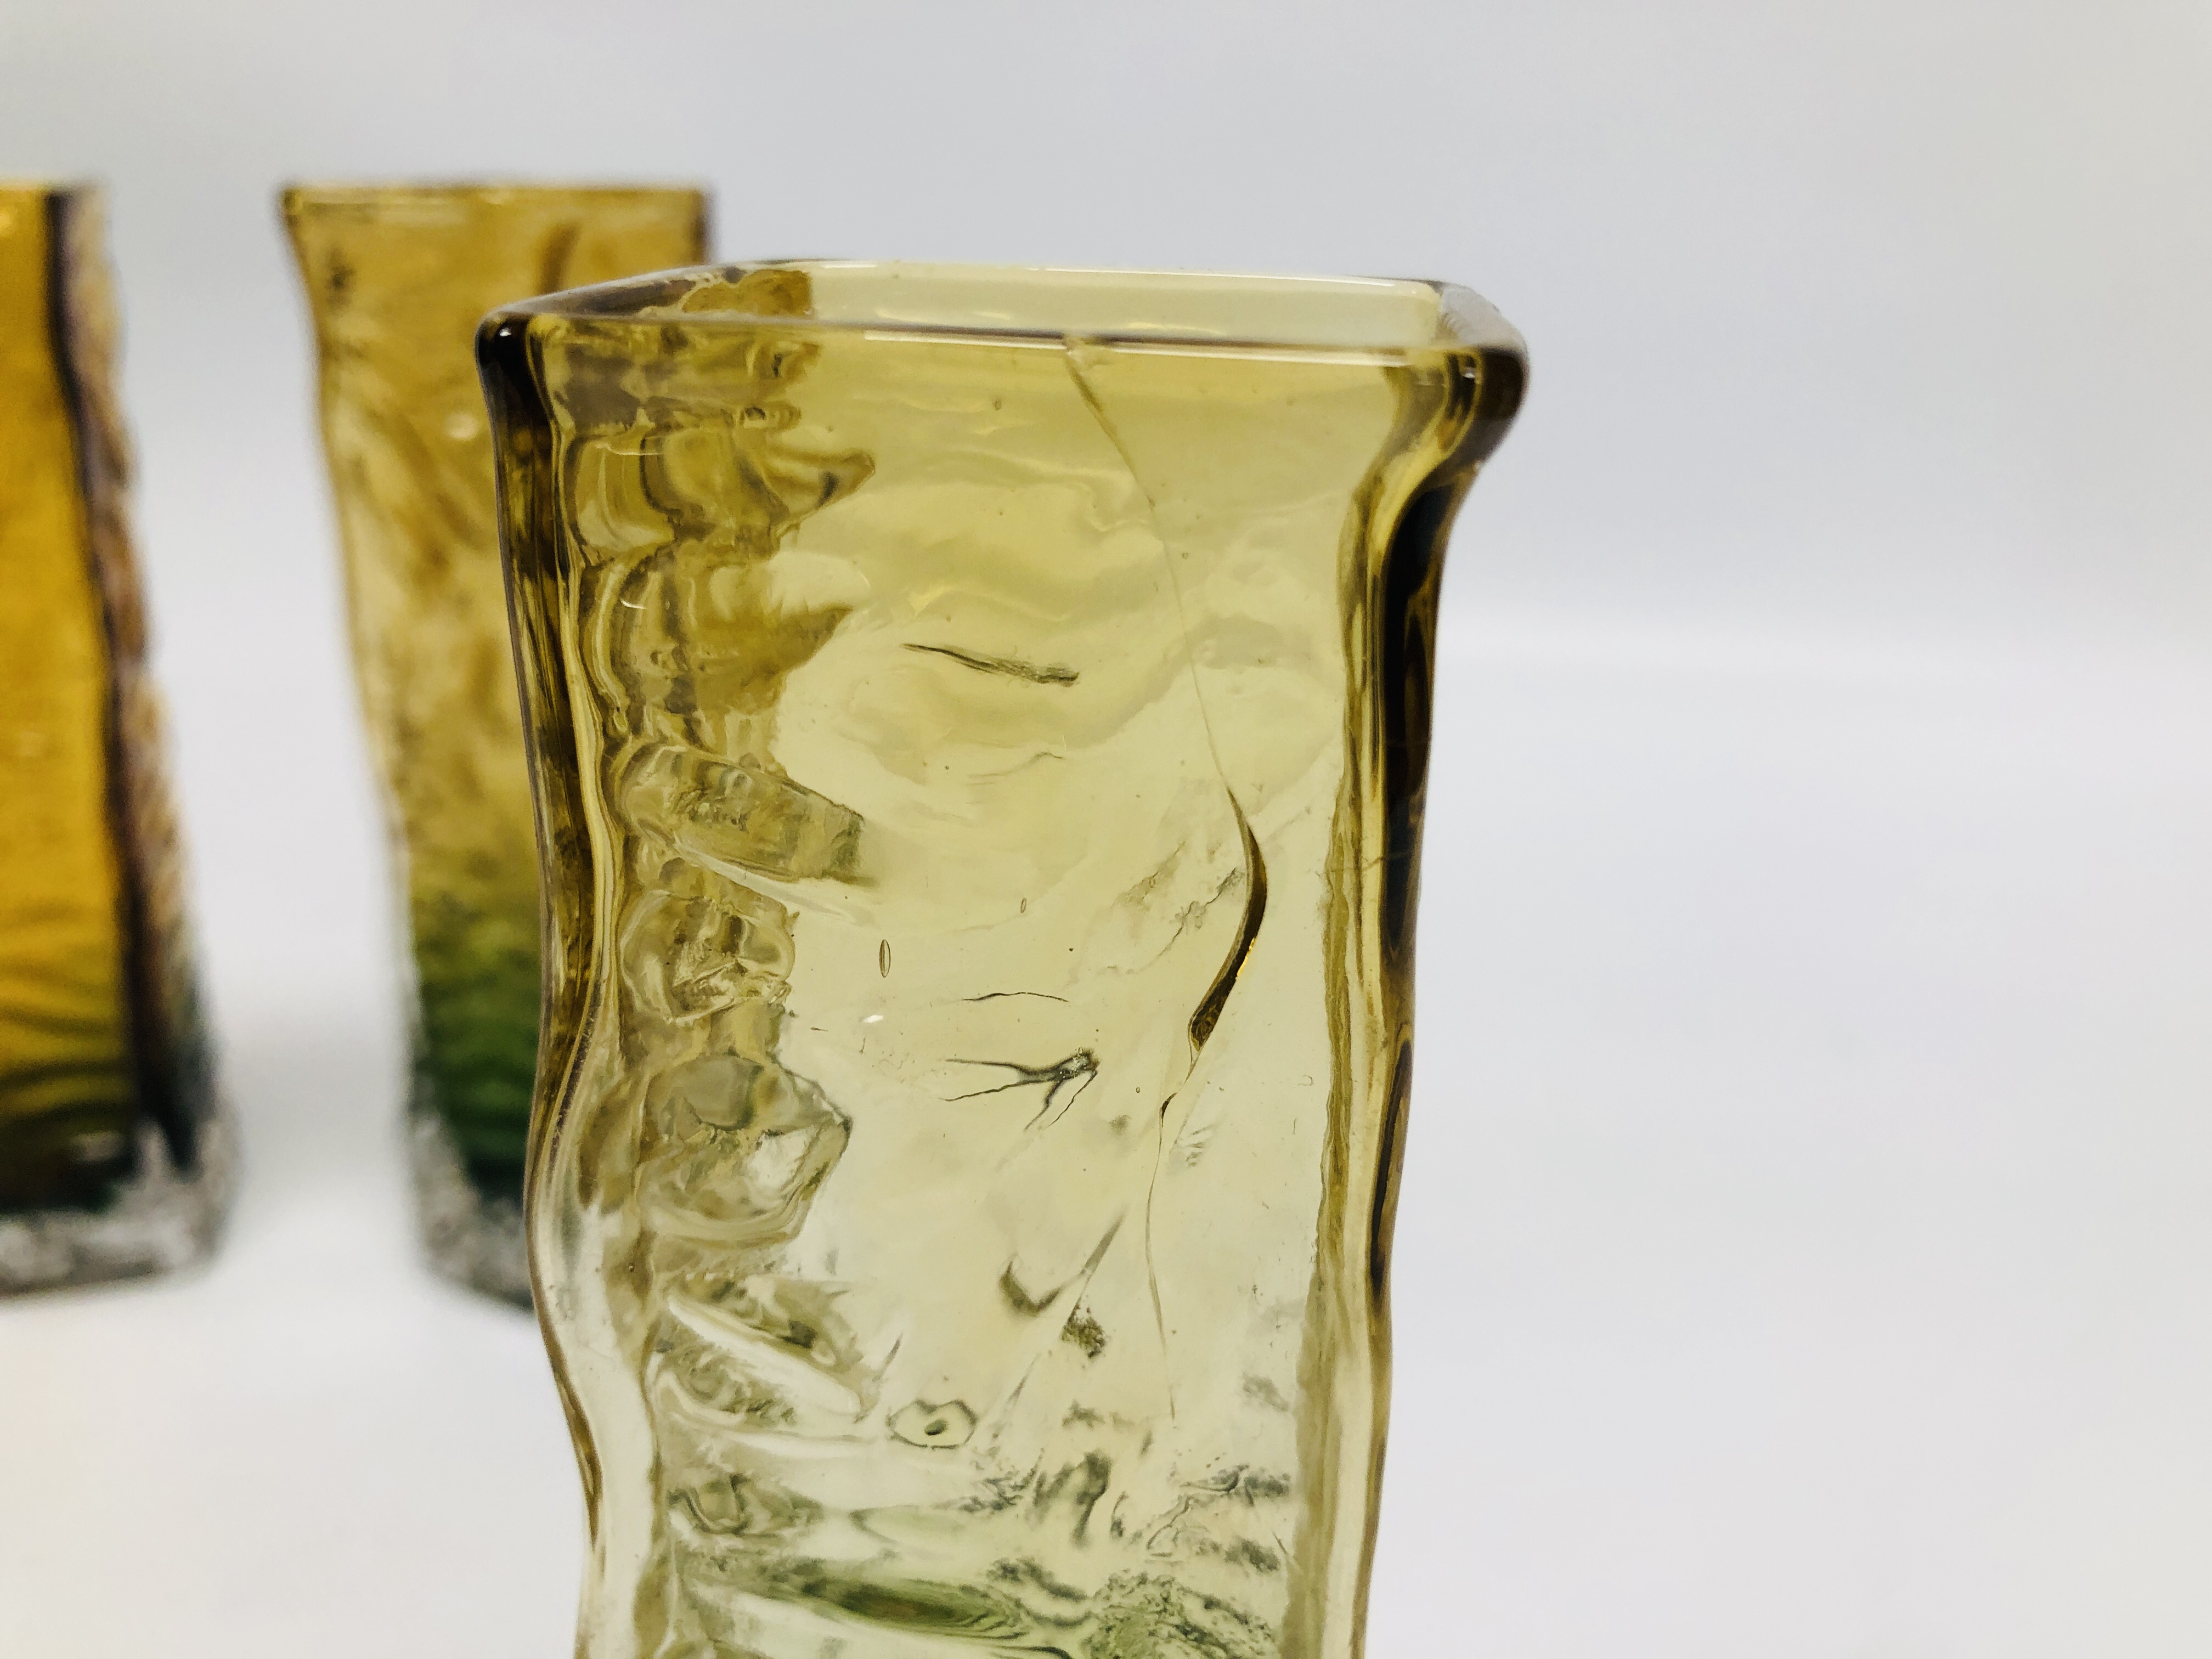 COLLECTION OF ART GLASS TO INCLUDE 3 TAGIMA STYLE VASES - Image 7 of 7